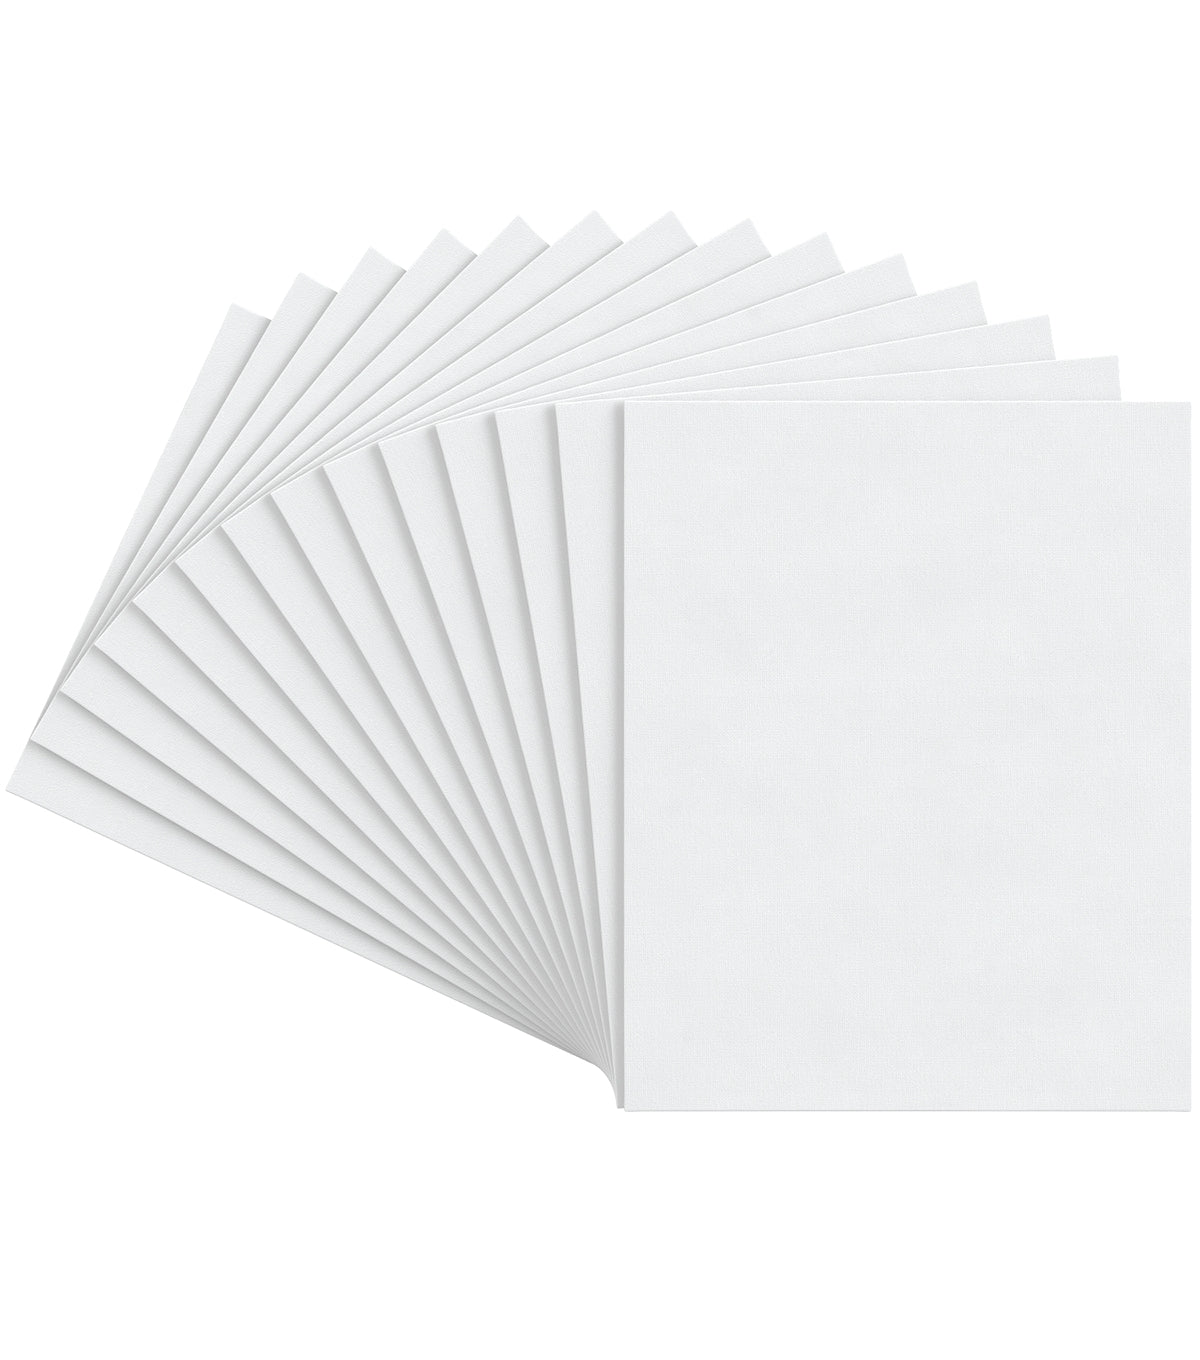 Arteza Stretched Canvas, Classic, White, 16x20, Large Blank Canvas Boards  For Painting - 6 Pack : Target